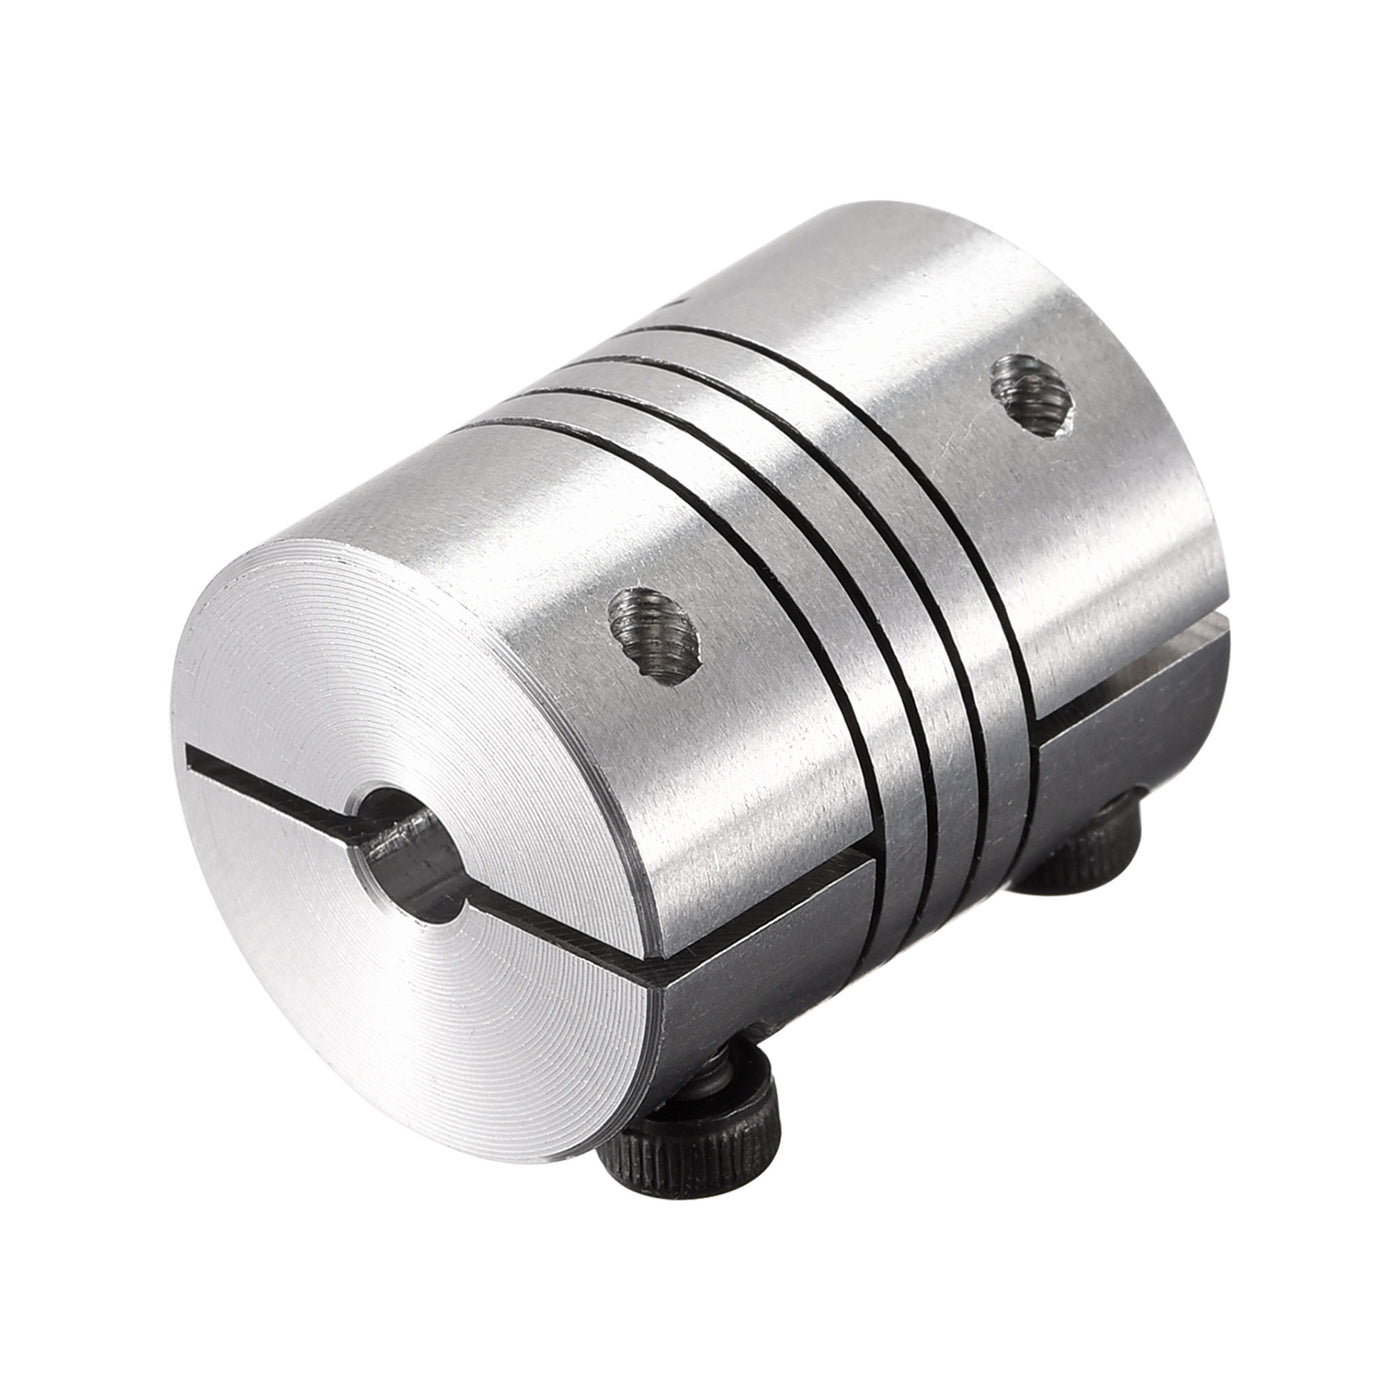 uxcell Uxcell 2PCS Motor Shaft 5mm to 6.35mm Helical Beam Coupler Coupling 20mm Dia 25mm Long